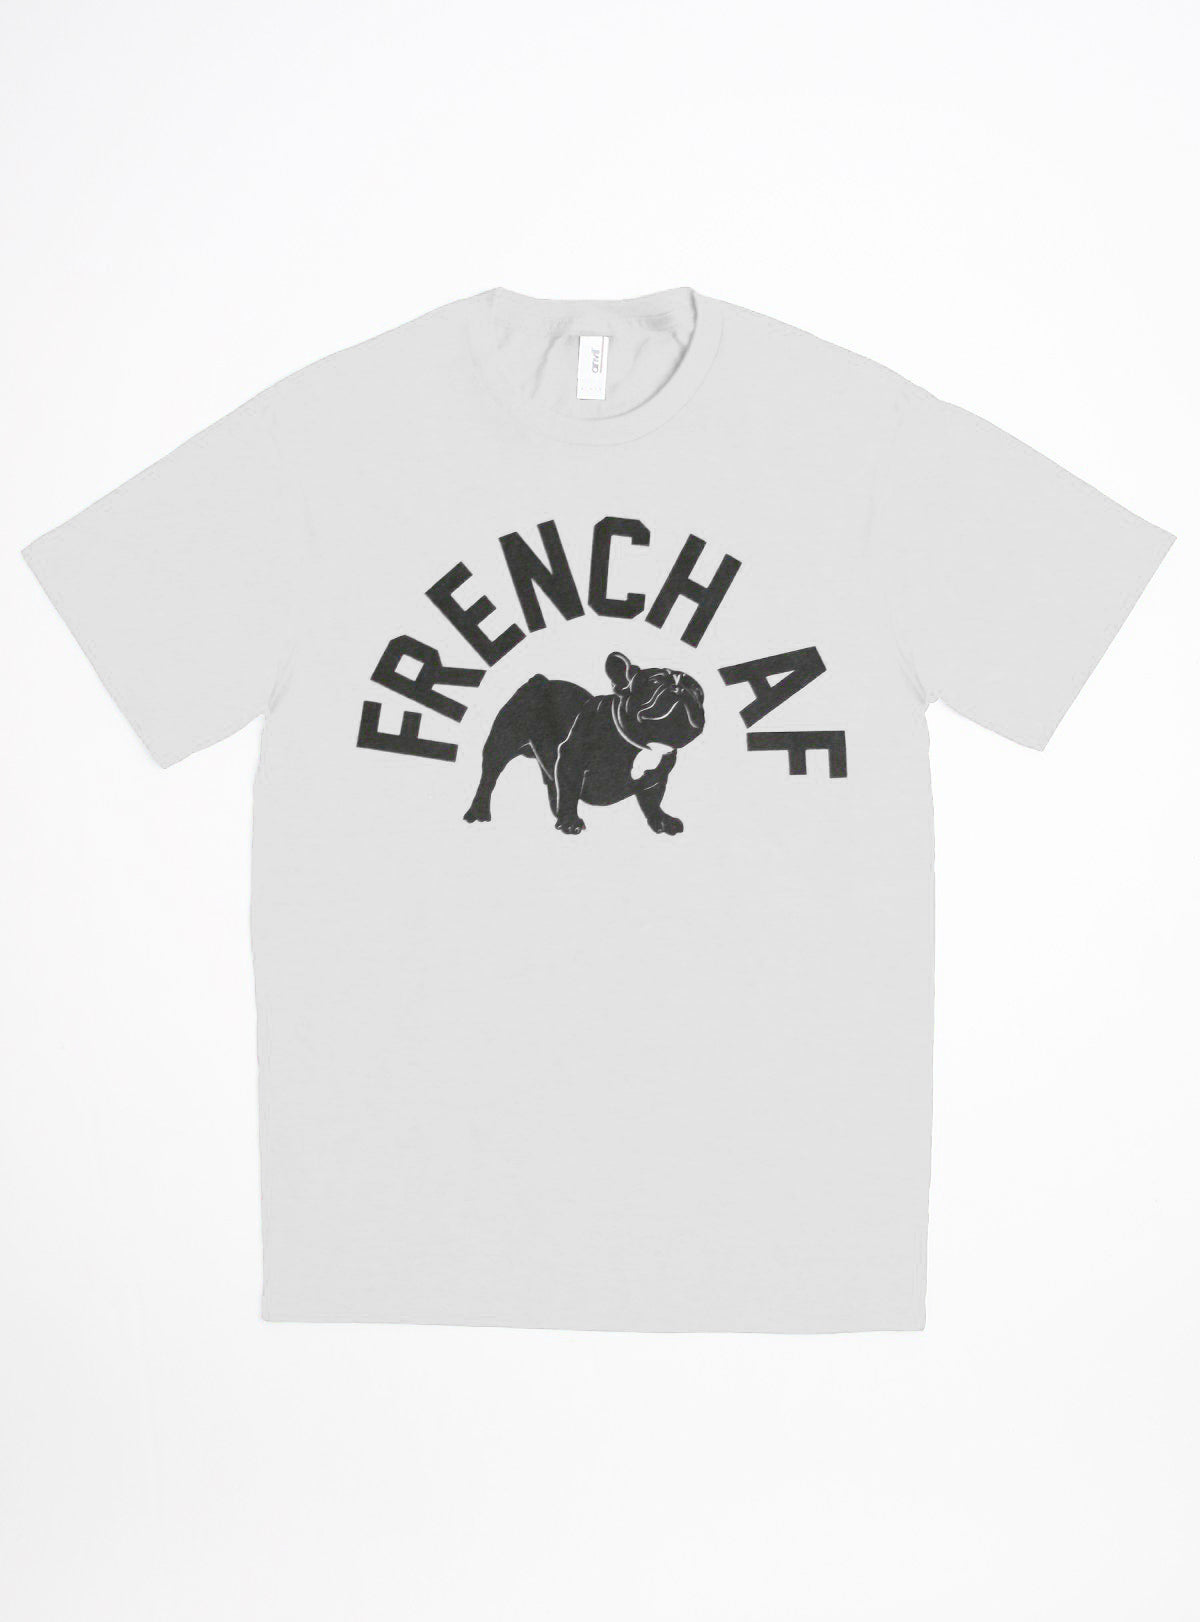 French AF Tee